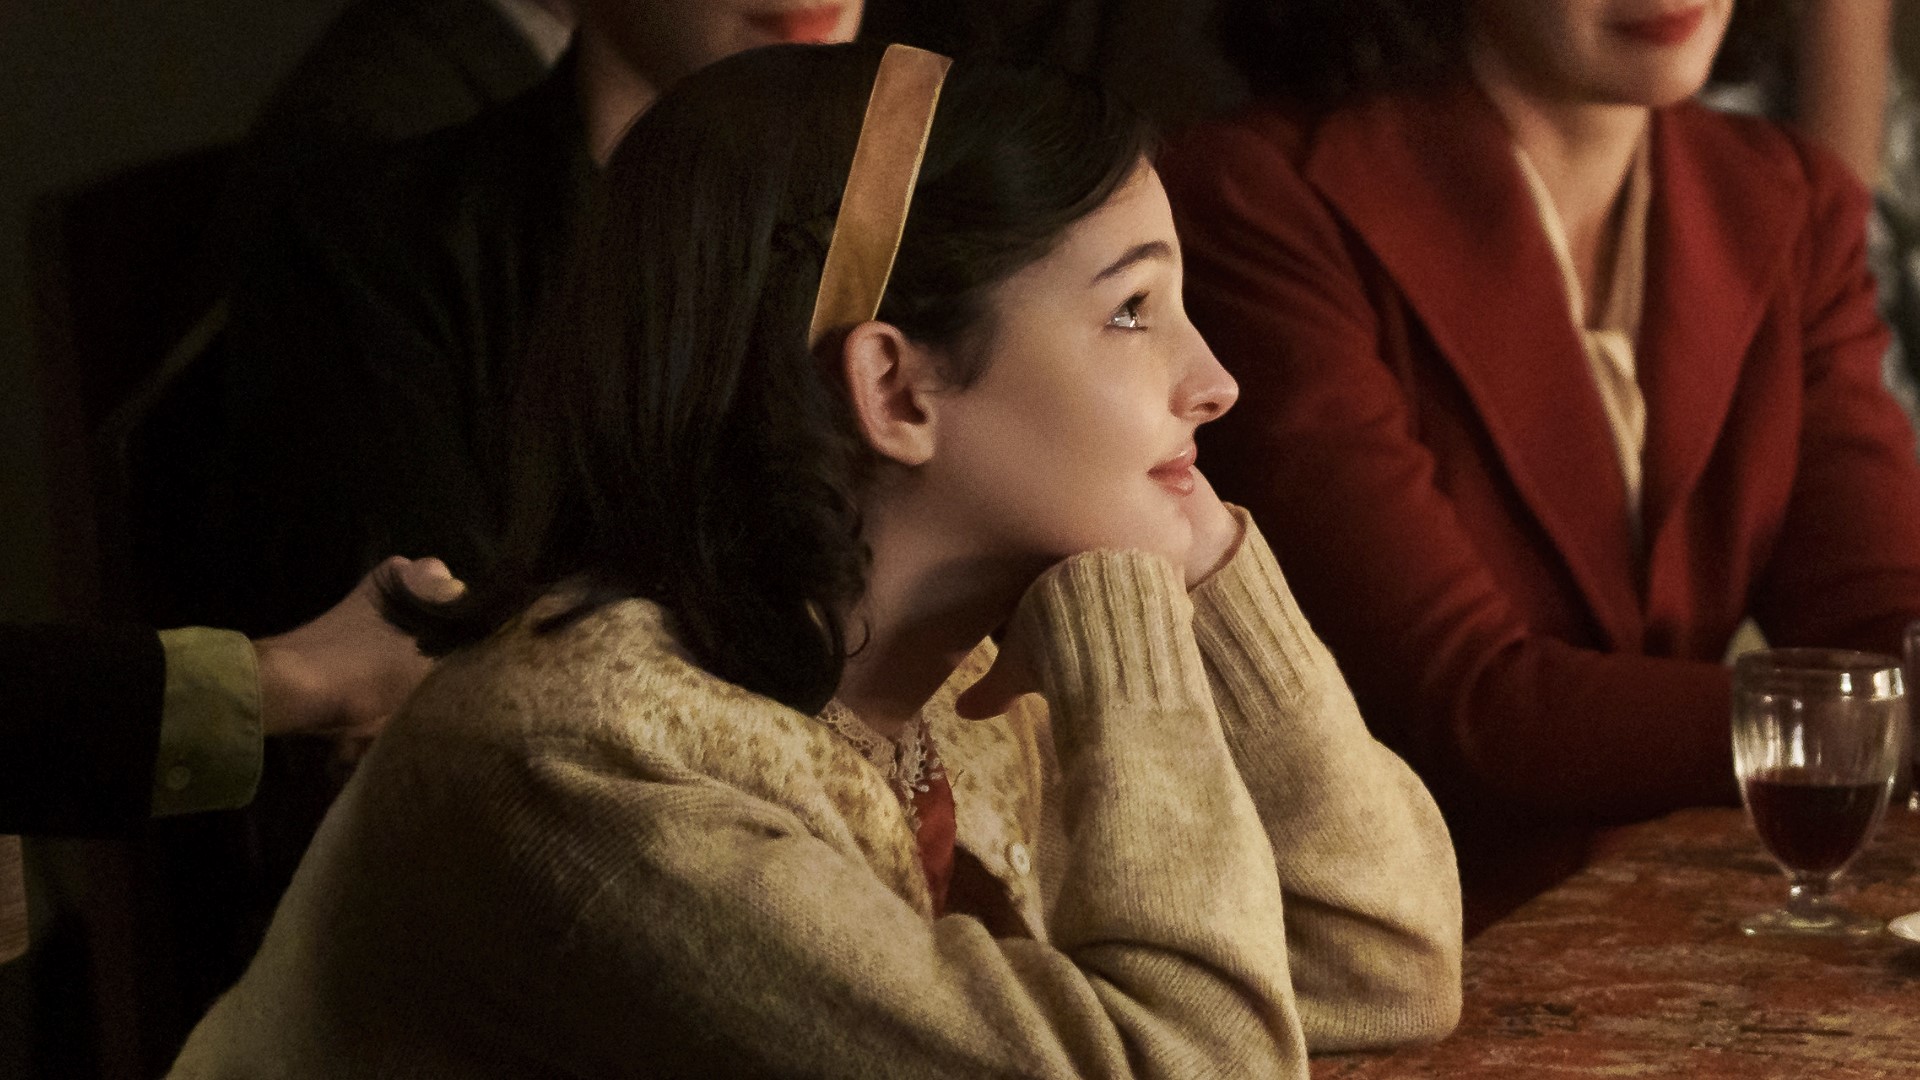 Billie Boullet plays the famous diarist in the limited series "A Small Light," but Anne Frank wasn't the original role Boullet intended to play.